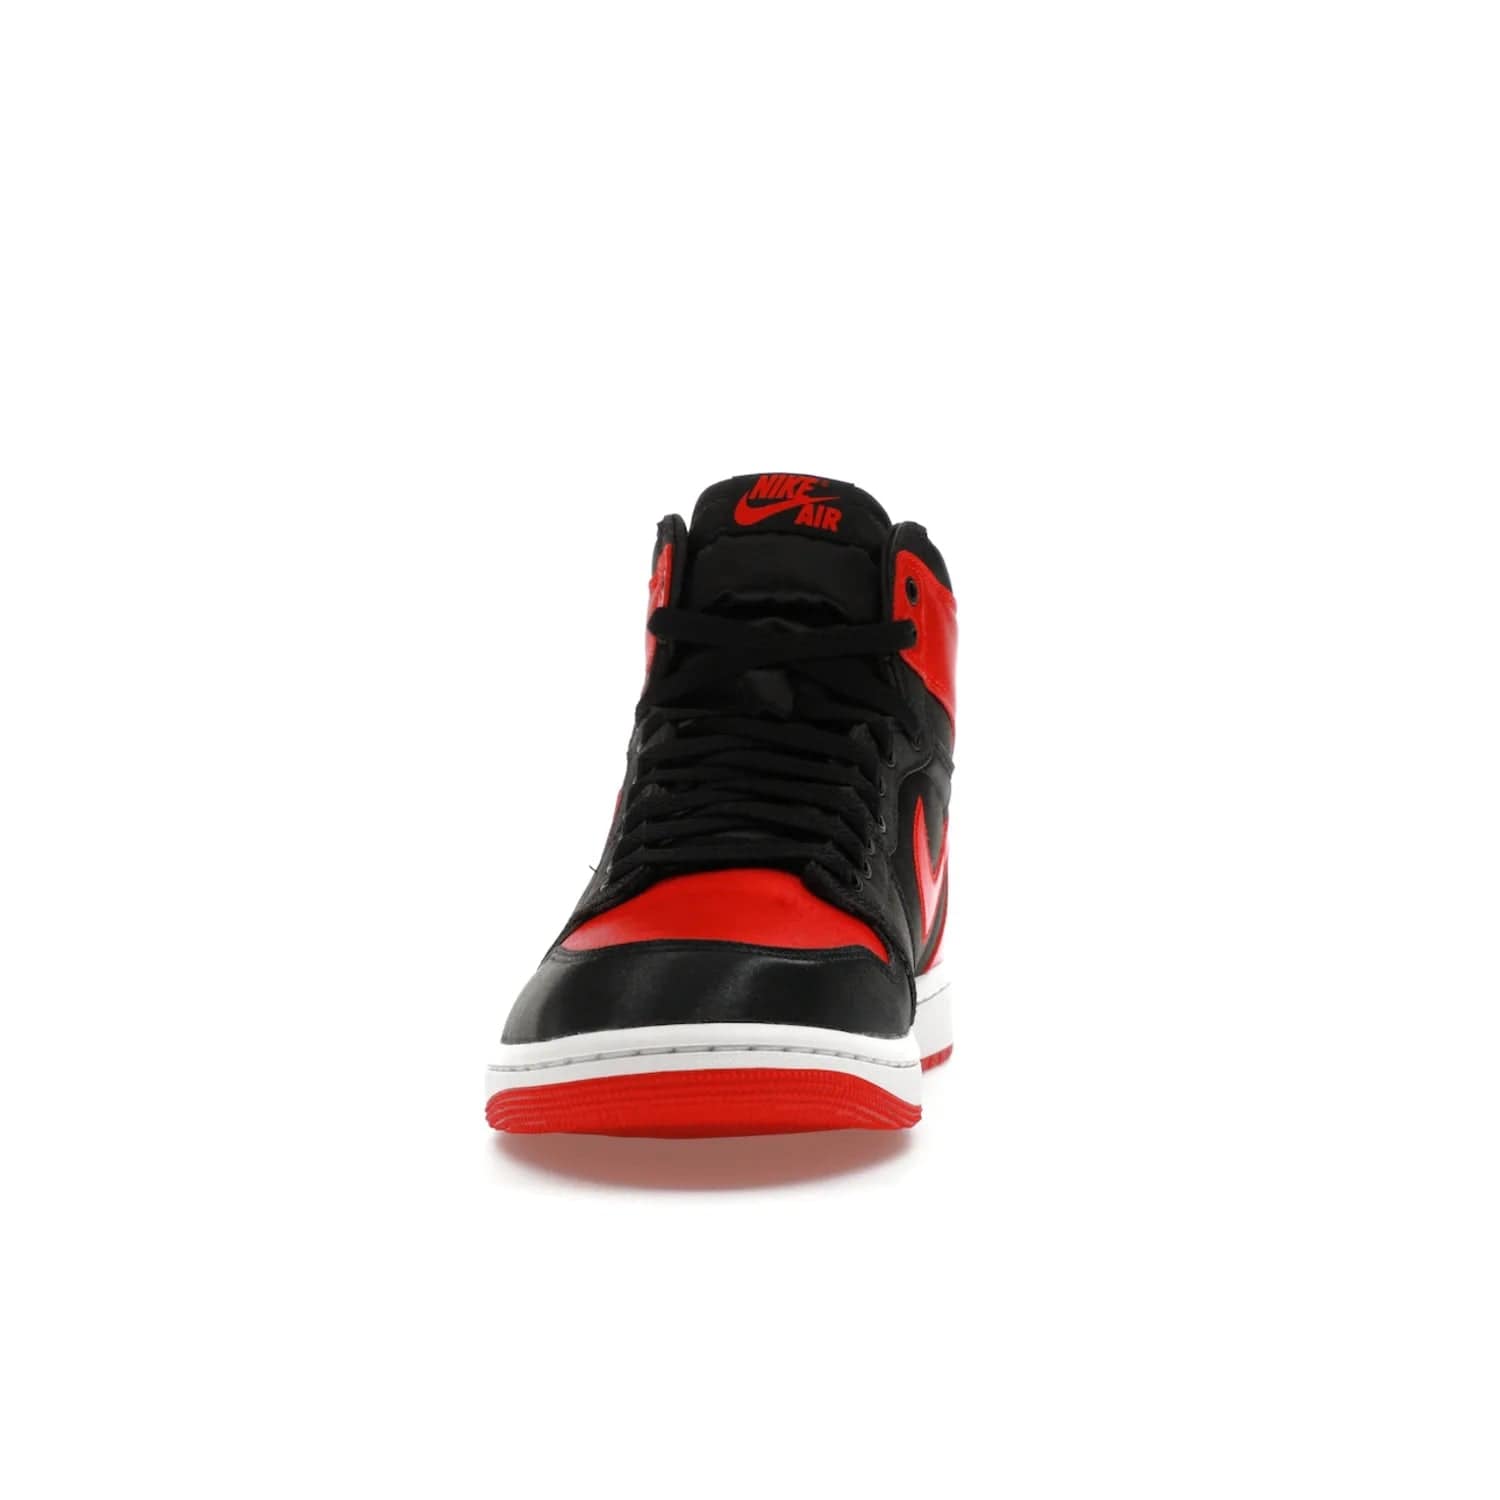 Jordan 1 Retro High OG Satin Bred (Women's) - Image 11 - Only at www.BallersClubKickz.com - Introducing the Jordan 1 Retro High OG Satin Bred (Women's). Luxe satin finish, contrasting hues & classic accents. Trending sneakers symbolizing timelessness & heritage. Make a bold statement with this iconic shoe. Available October 4, 2023.